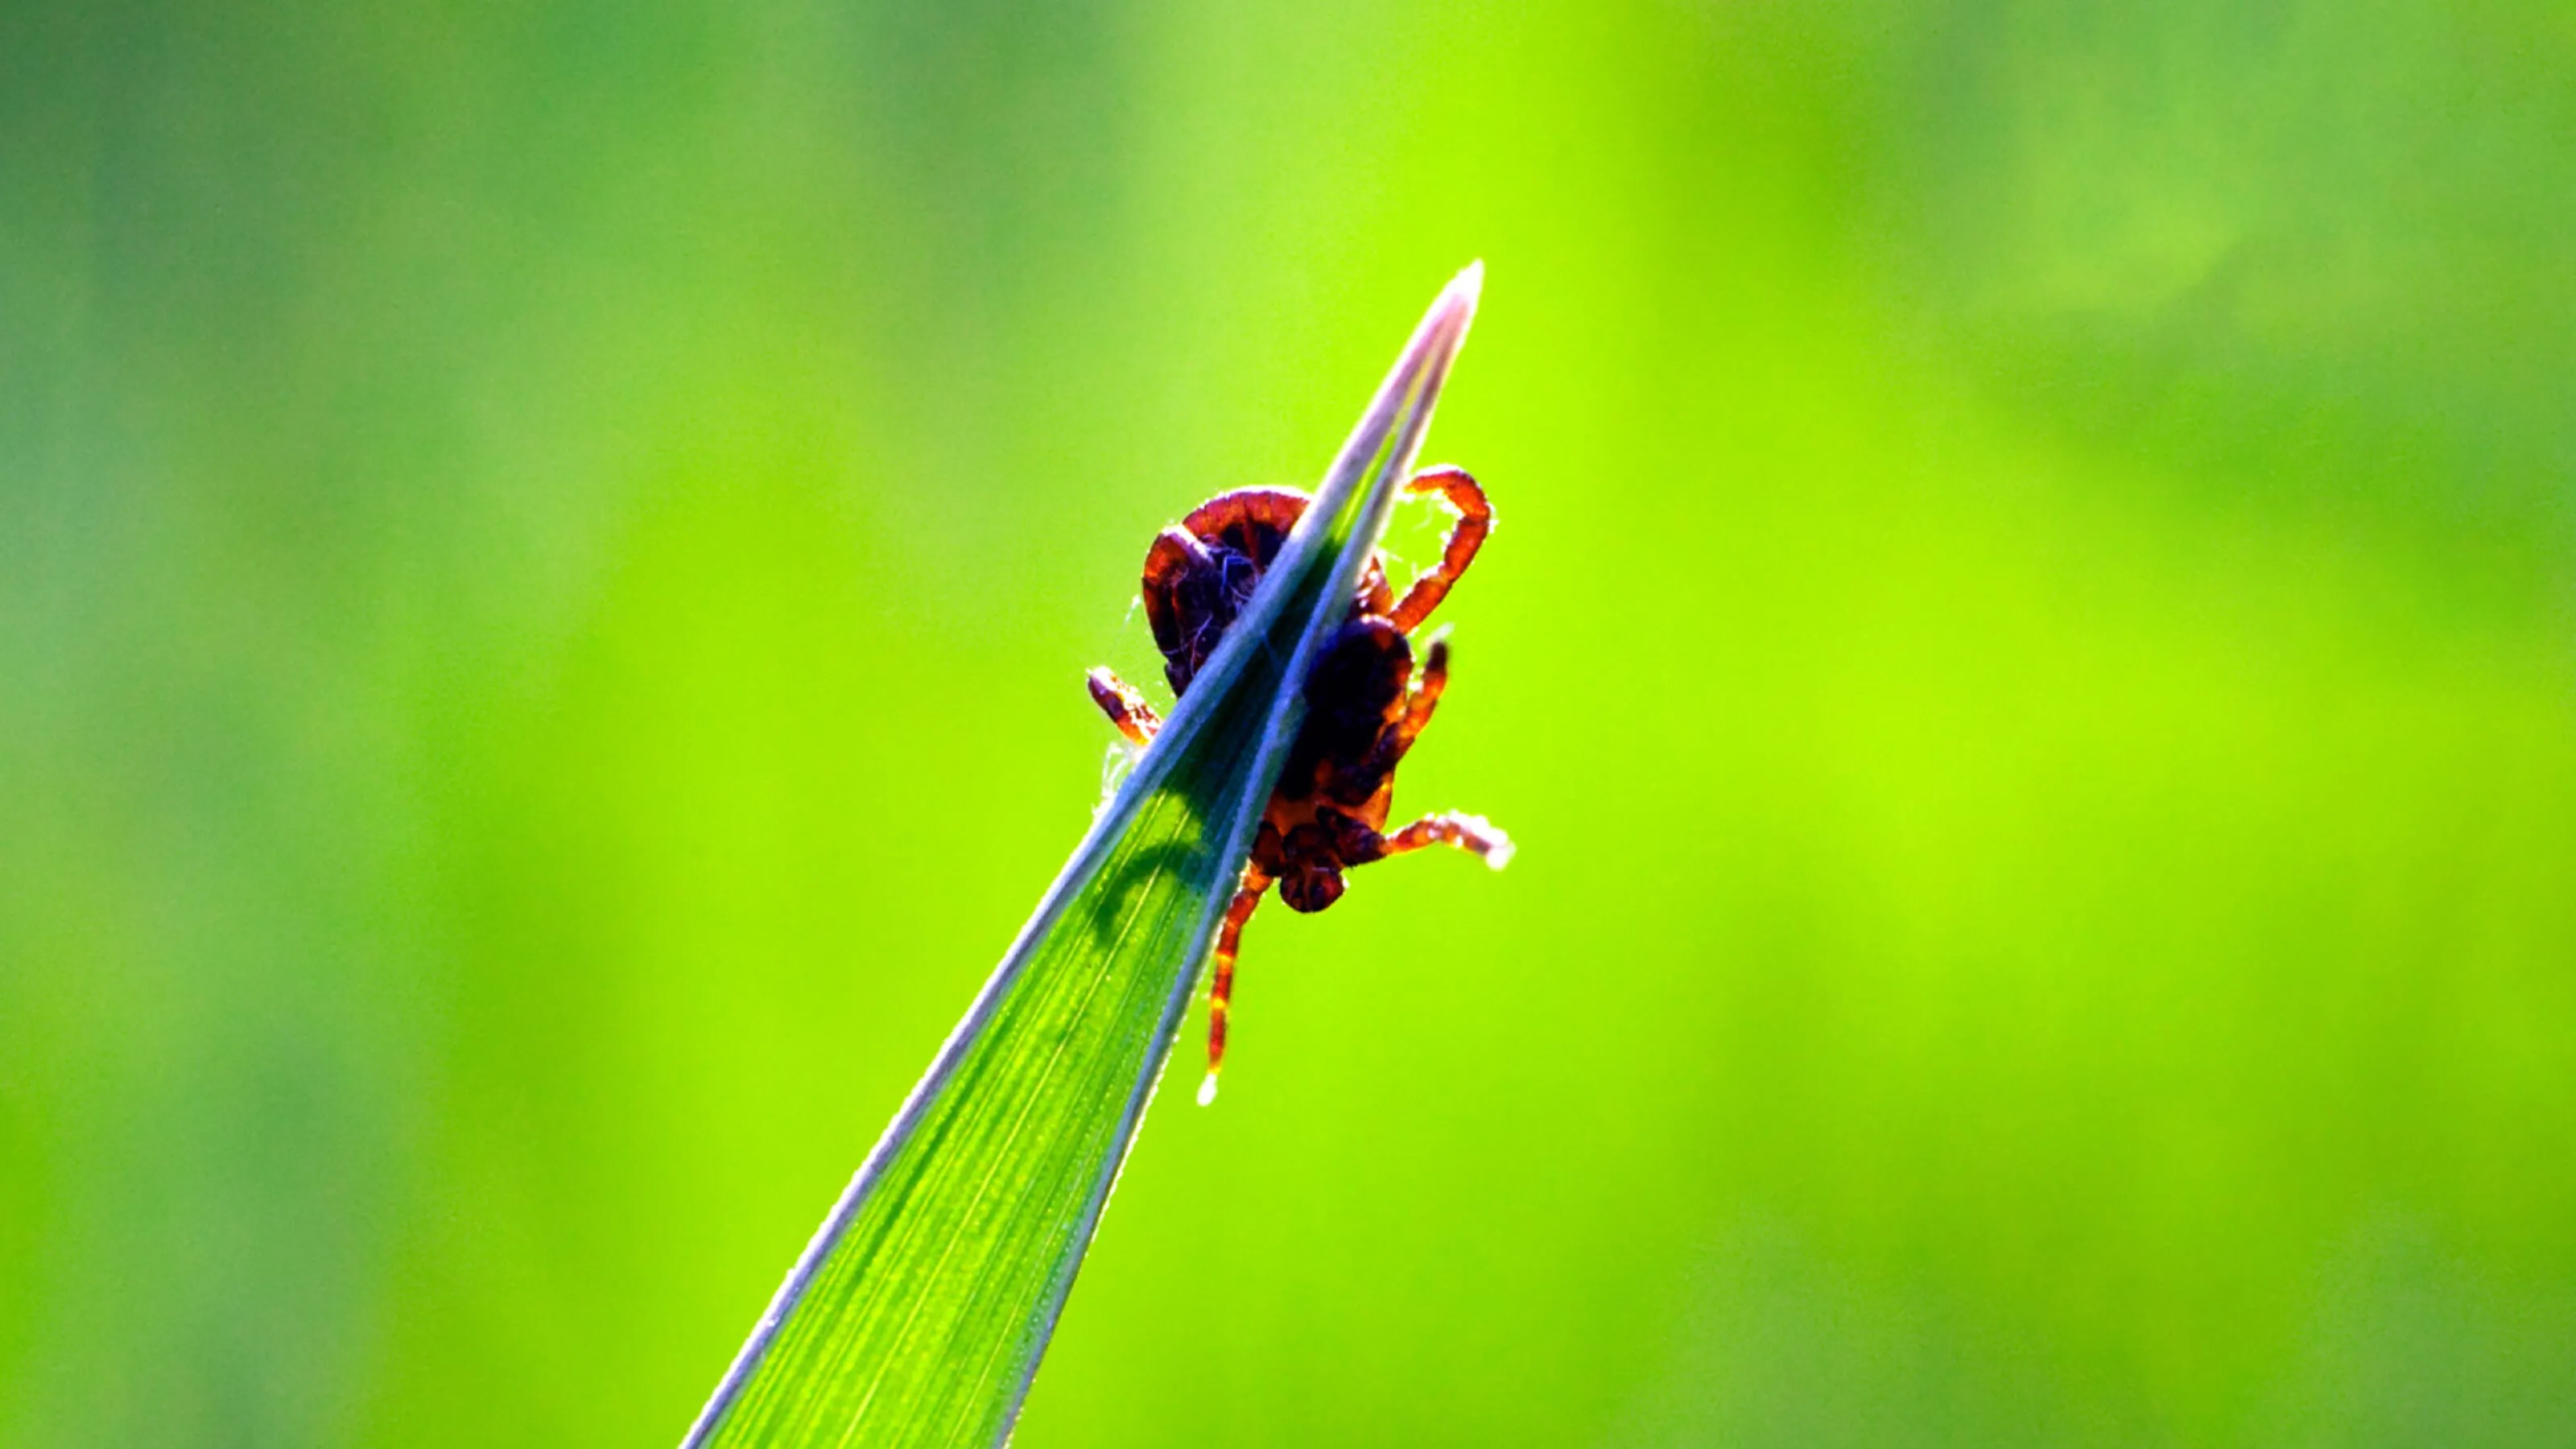 A tick clinging to a blade of grass against a green background.